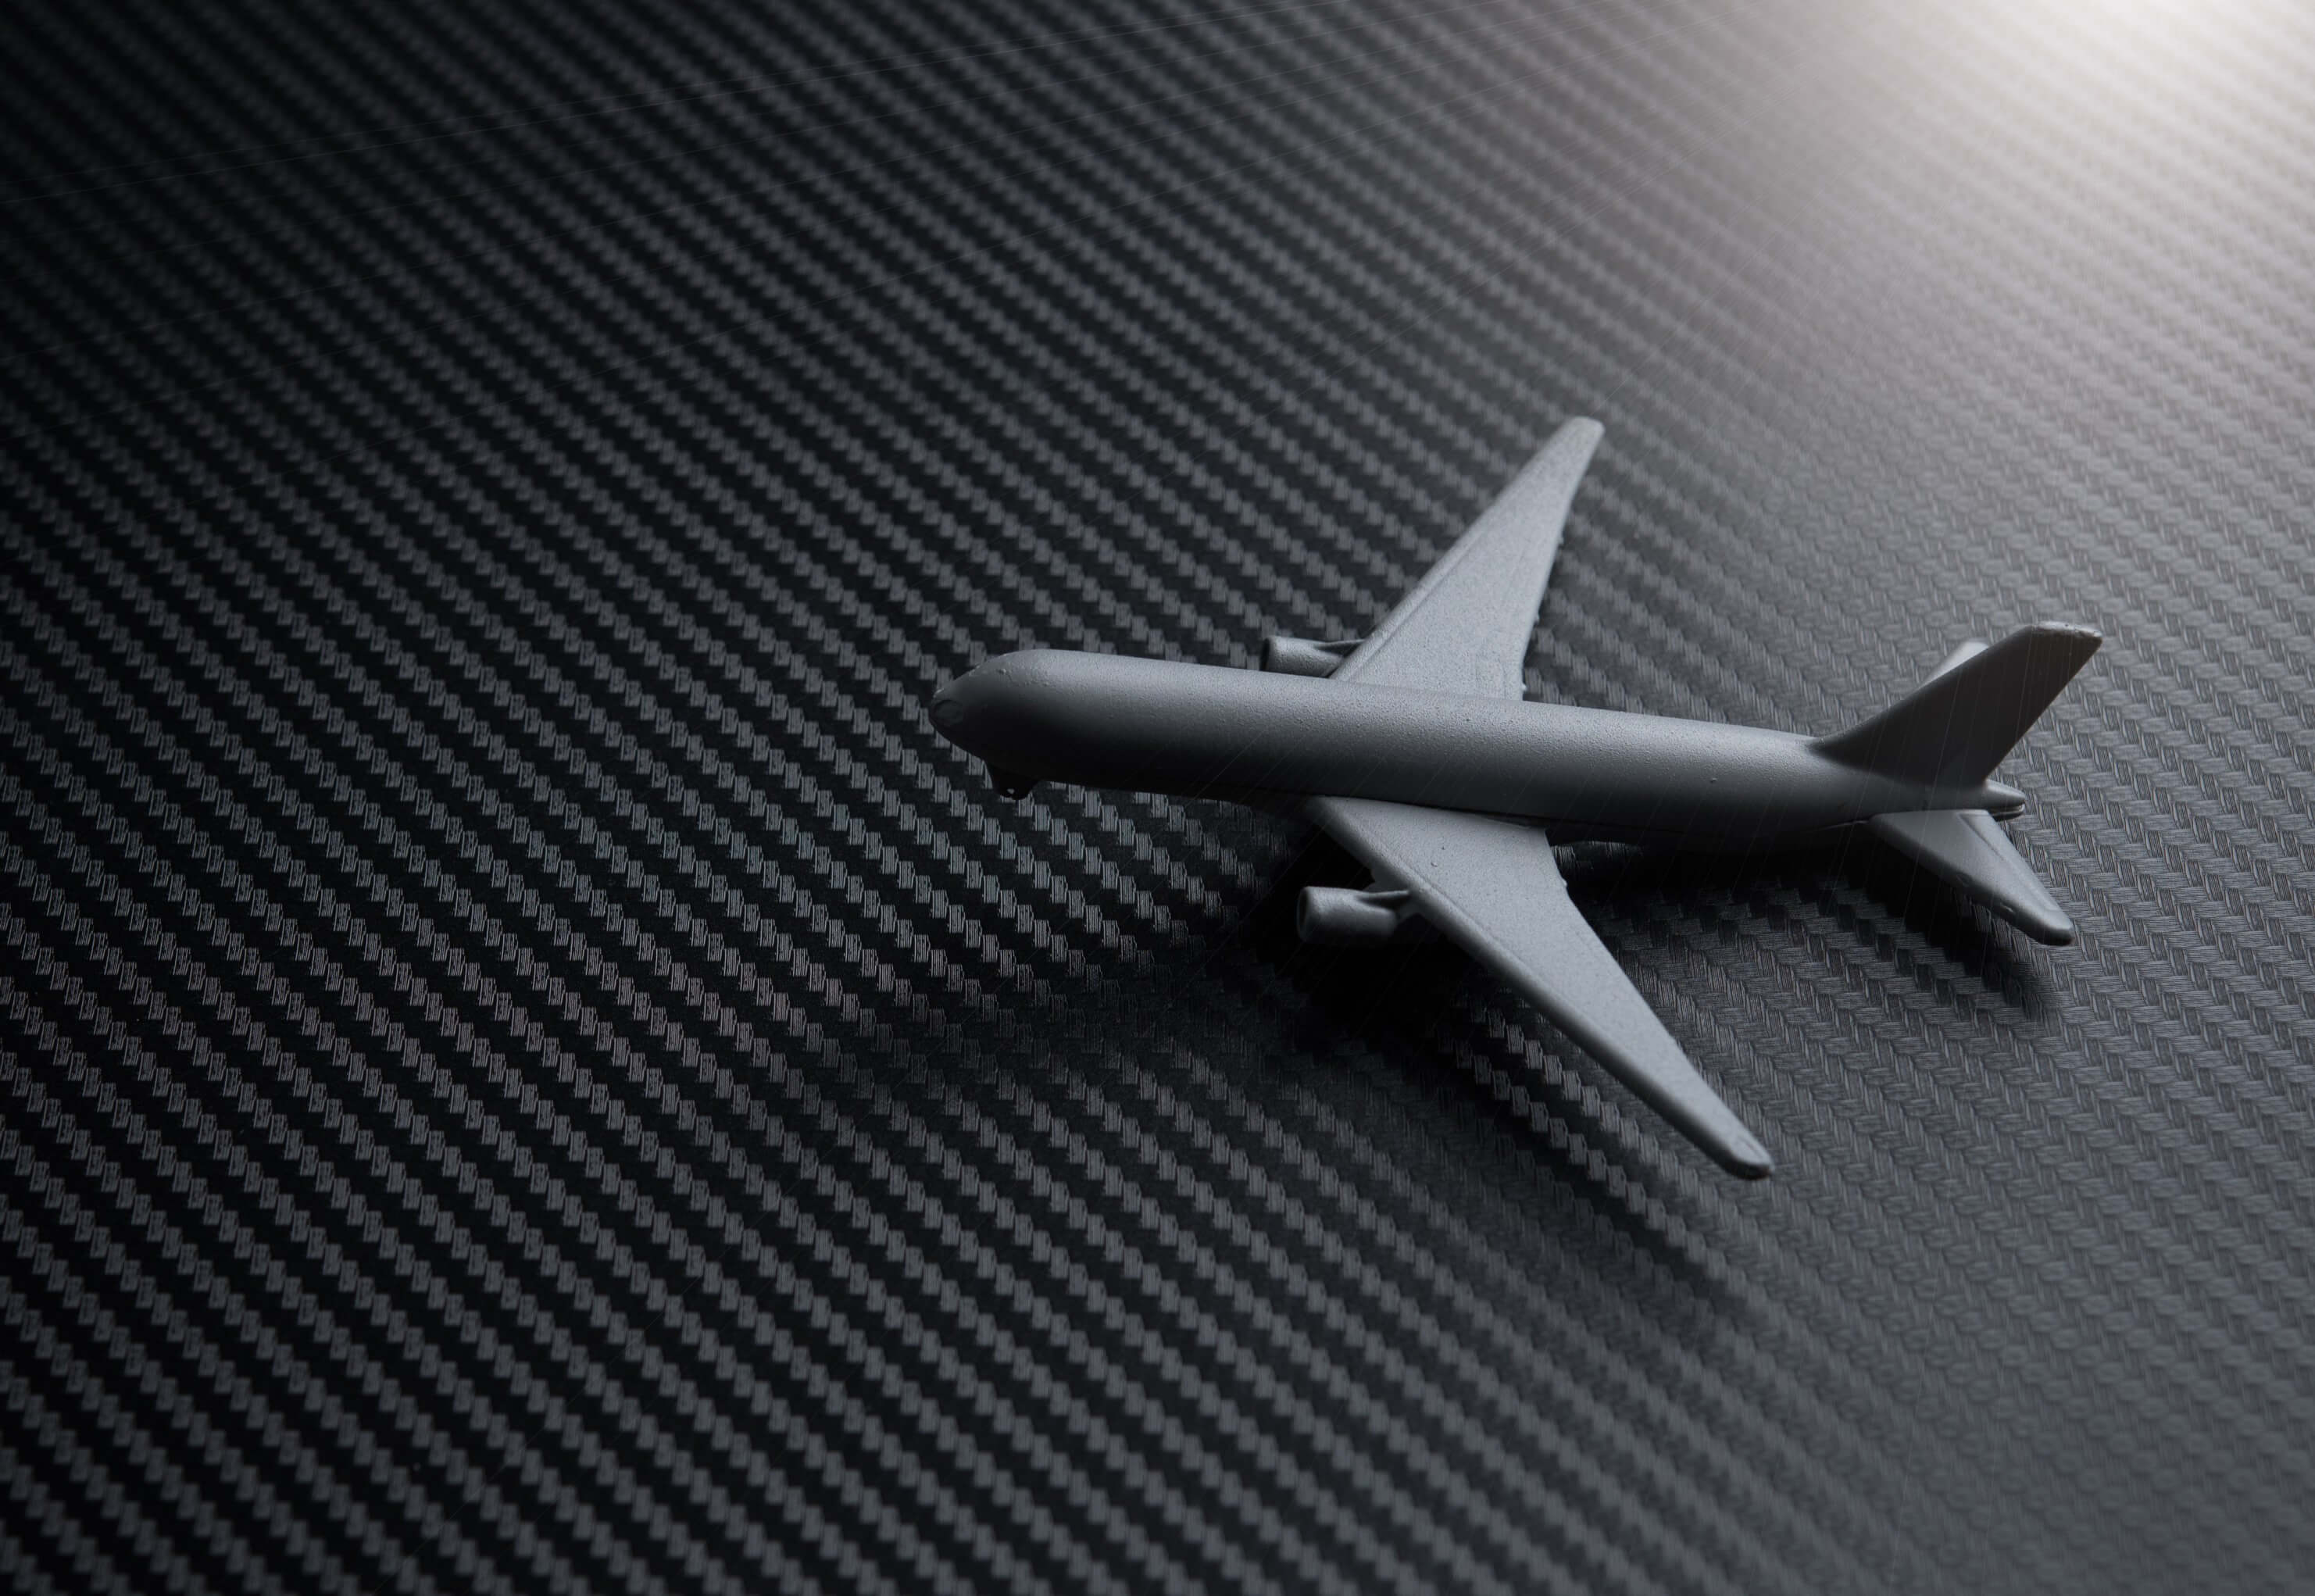 Reasons Why Carbon Fiber is Preferred for Manufacturing Aircraft